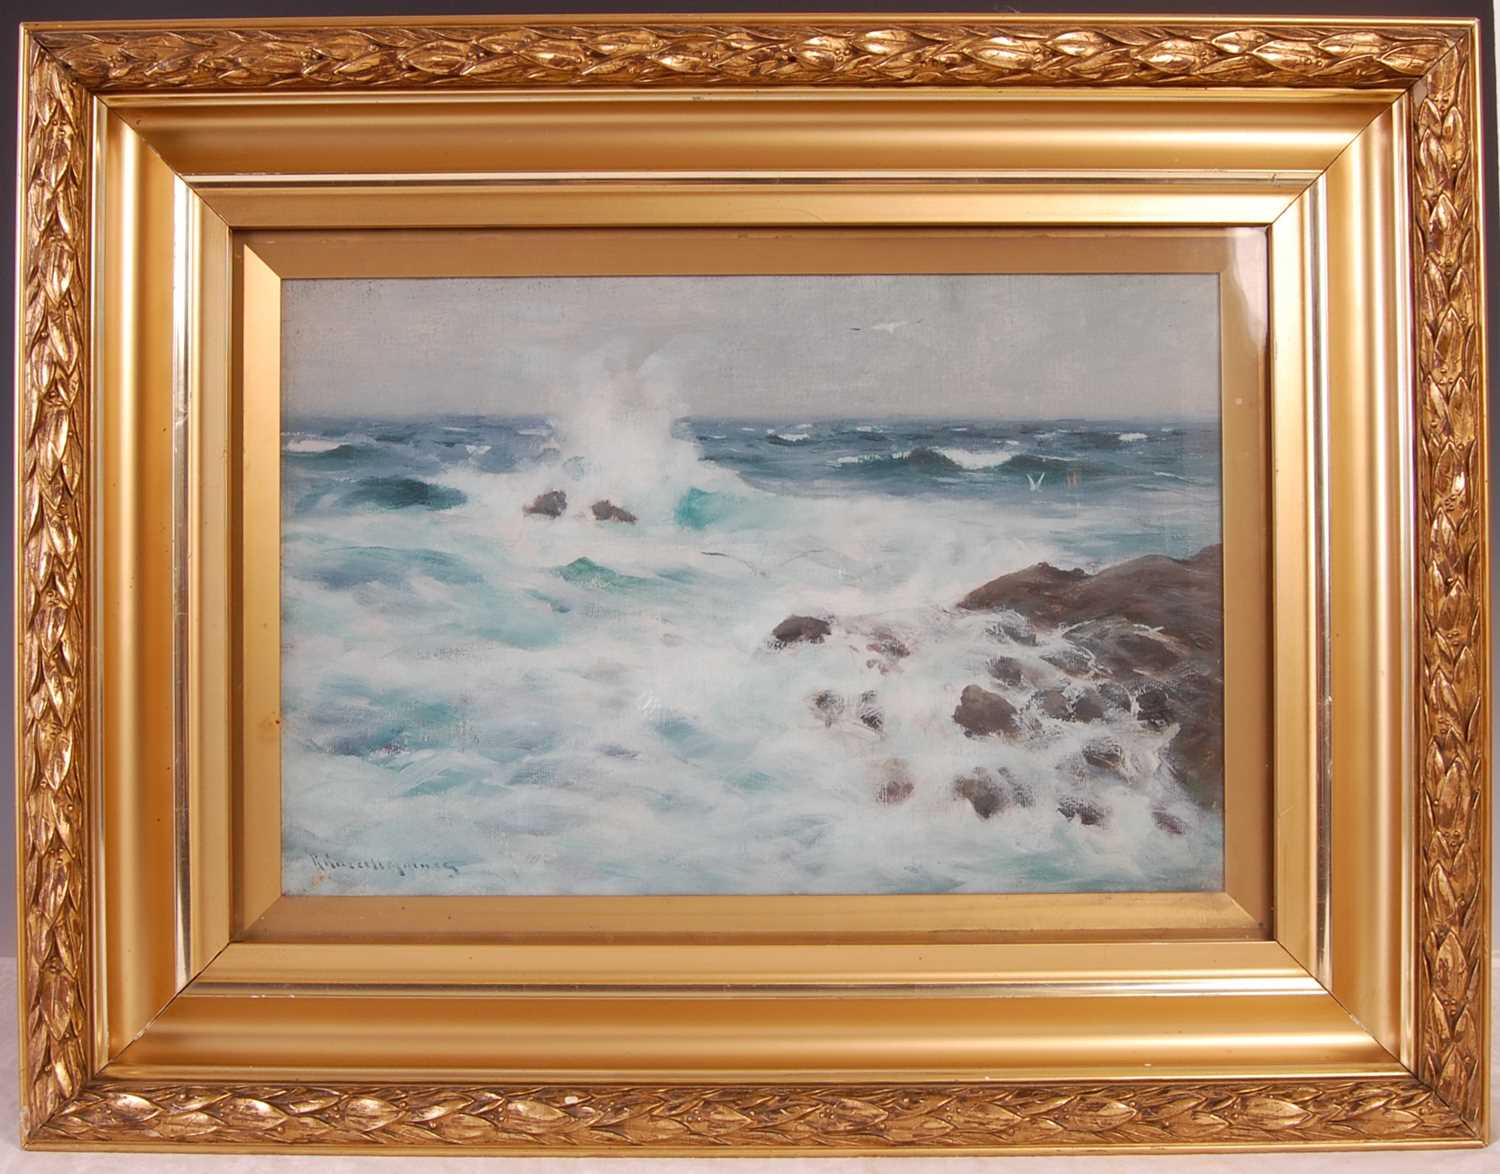 Robert Russell Macnee RGI (1880-1952) Seascape with breaking waves oil on canvas, signed lower - Image 2 of 5